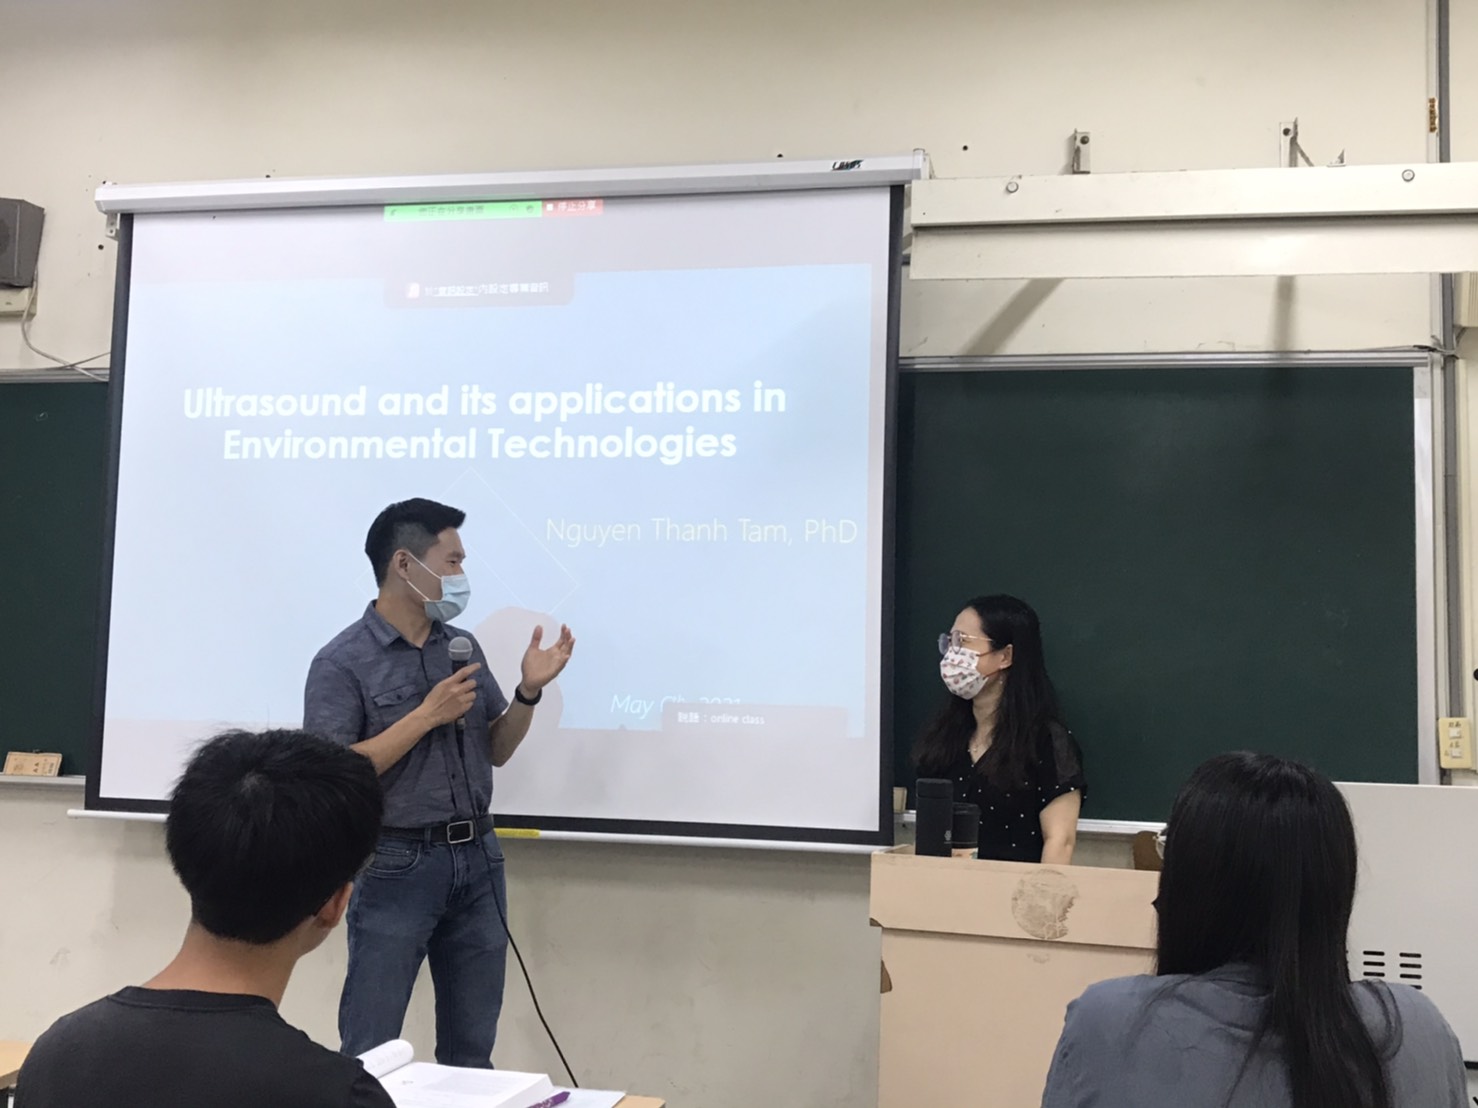 Taiwan-Vietnam Course Exchange: Ultrasound and its applications in Environmental Technologies